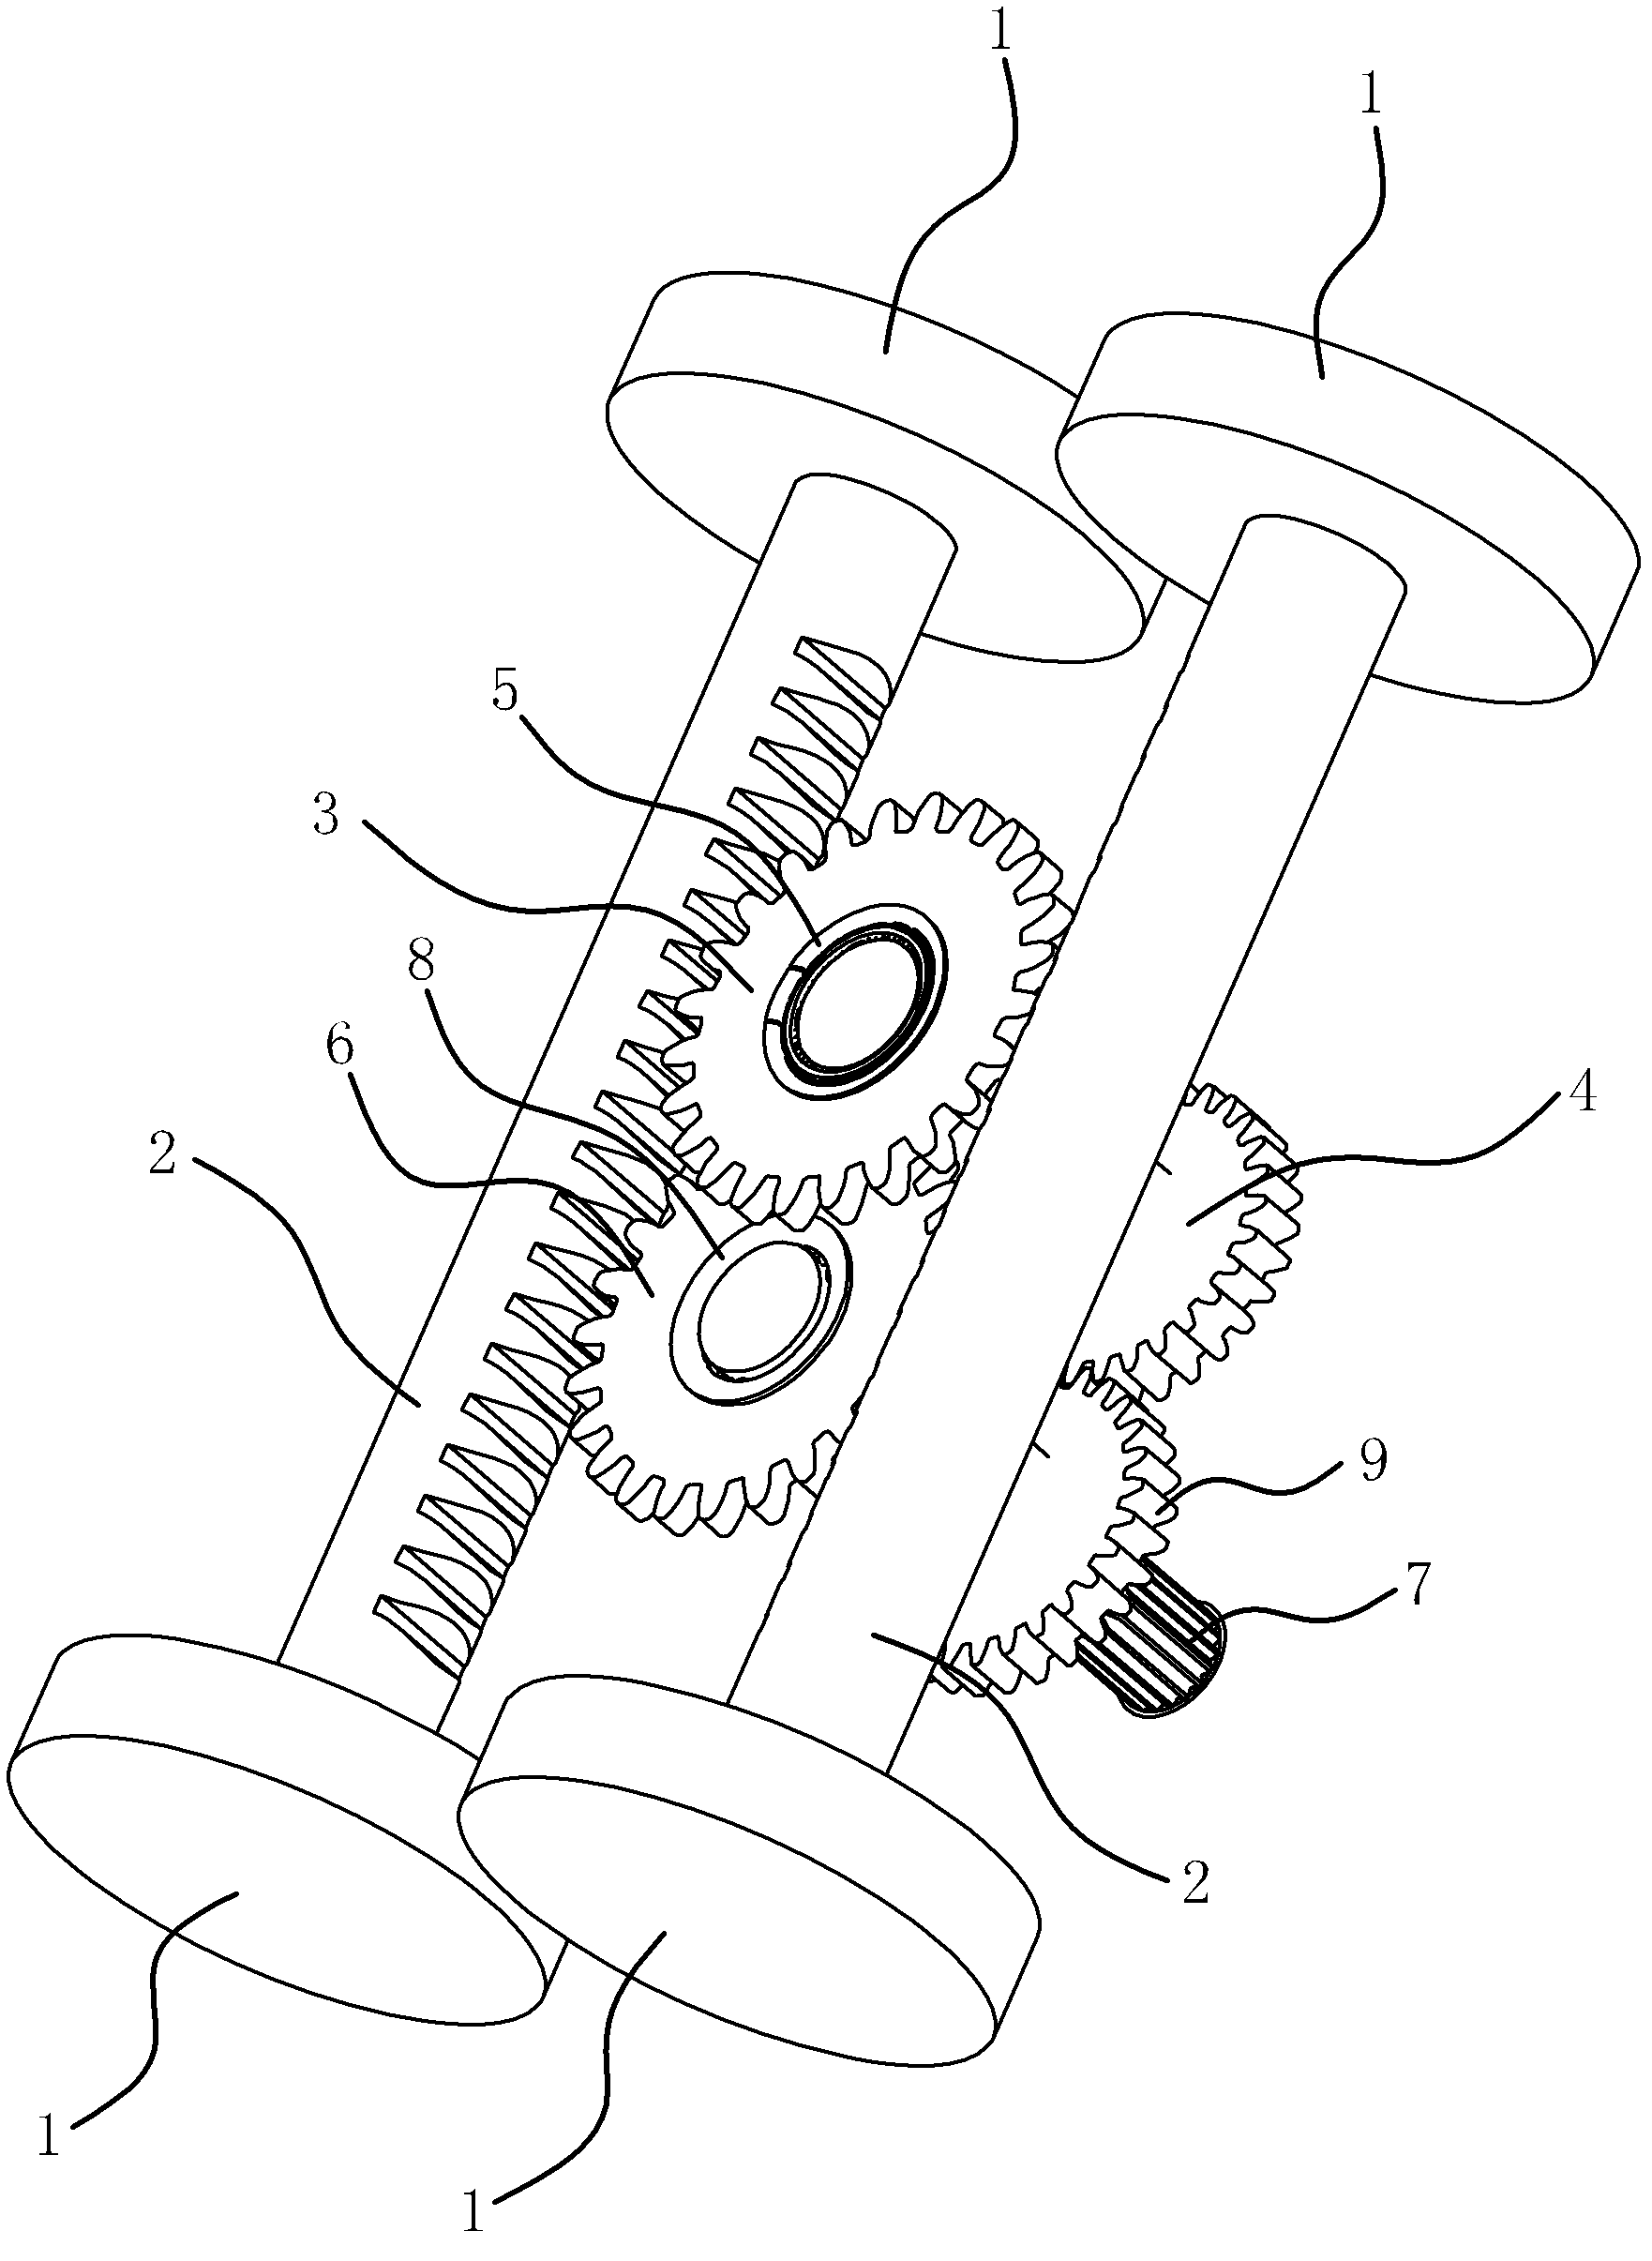 Combustion engine without crank shaft connection rod